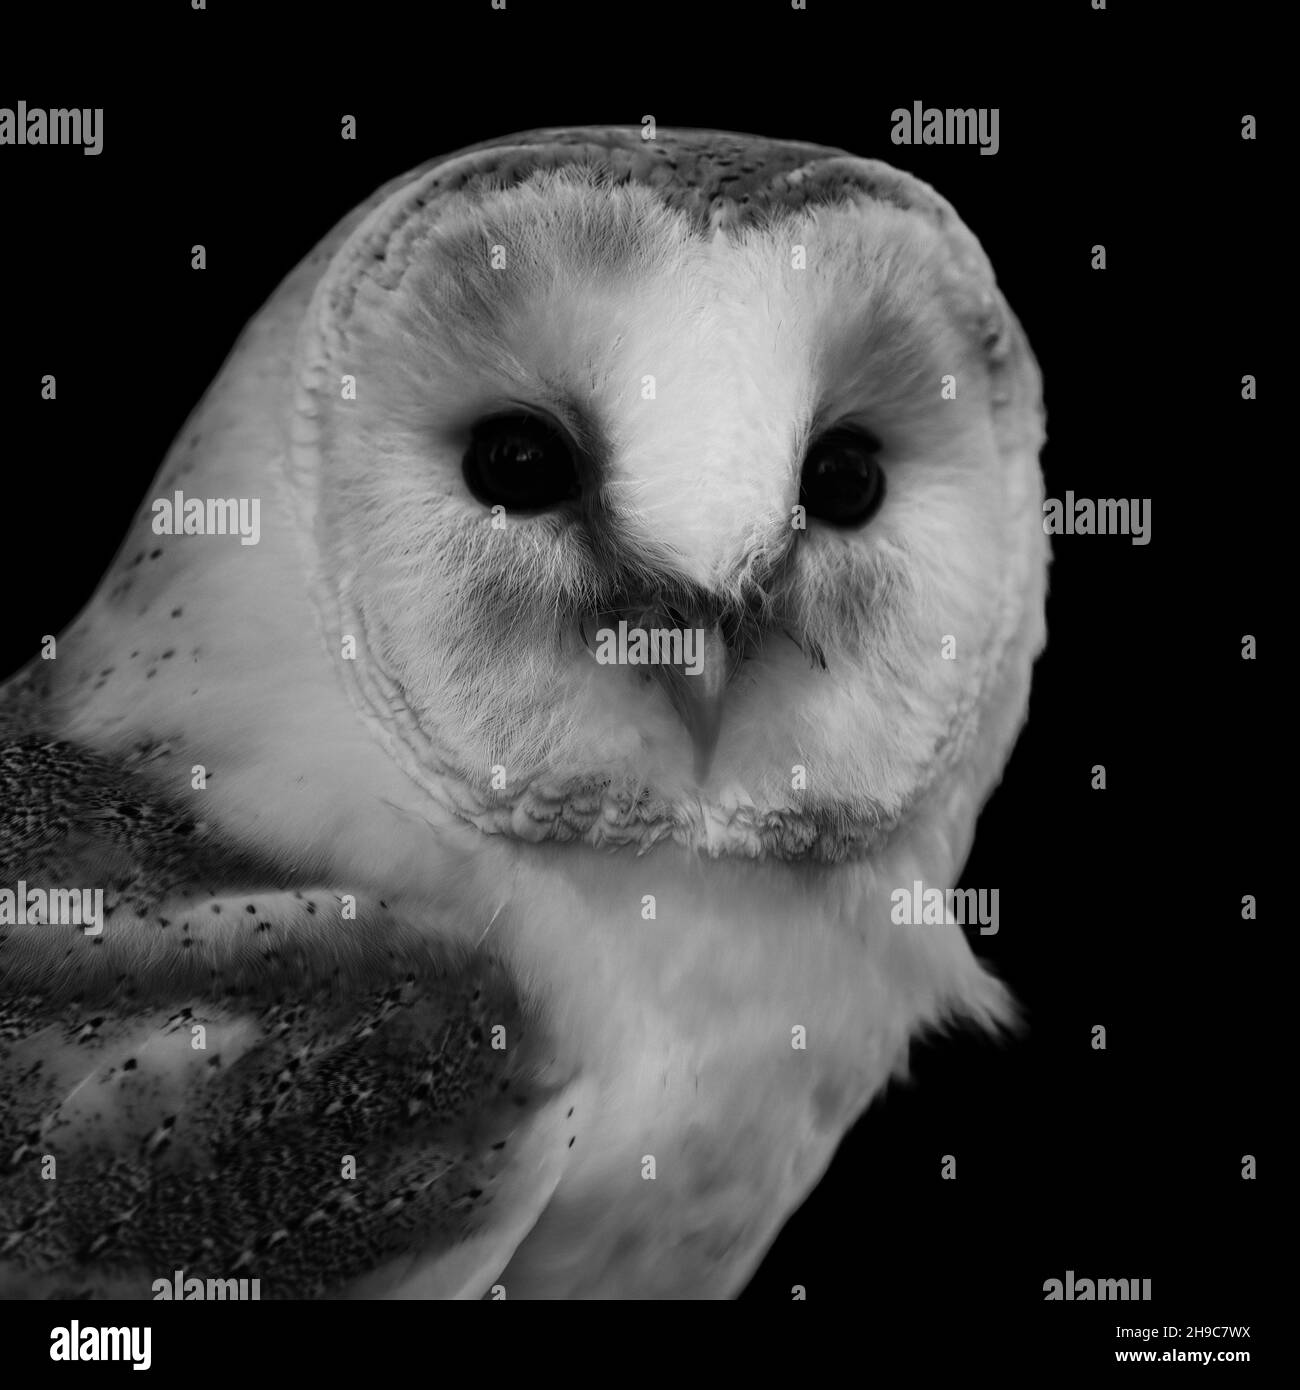 black and white close up of barn owl head Stock Photo